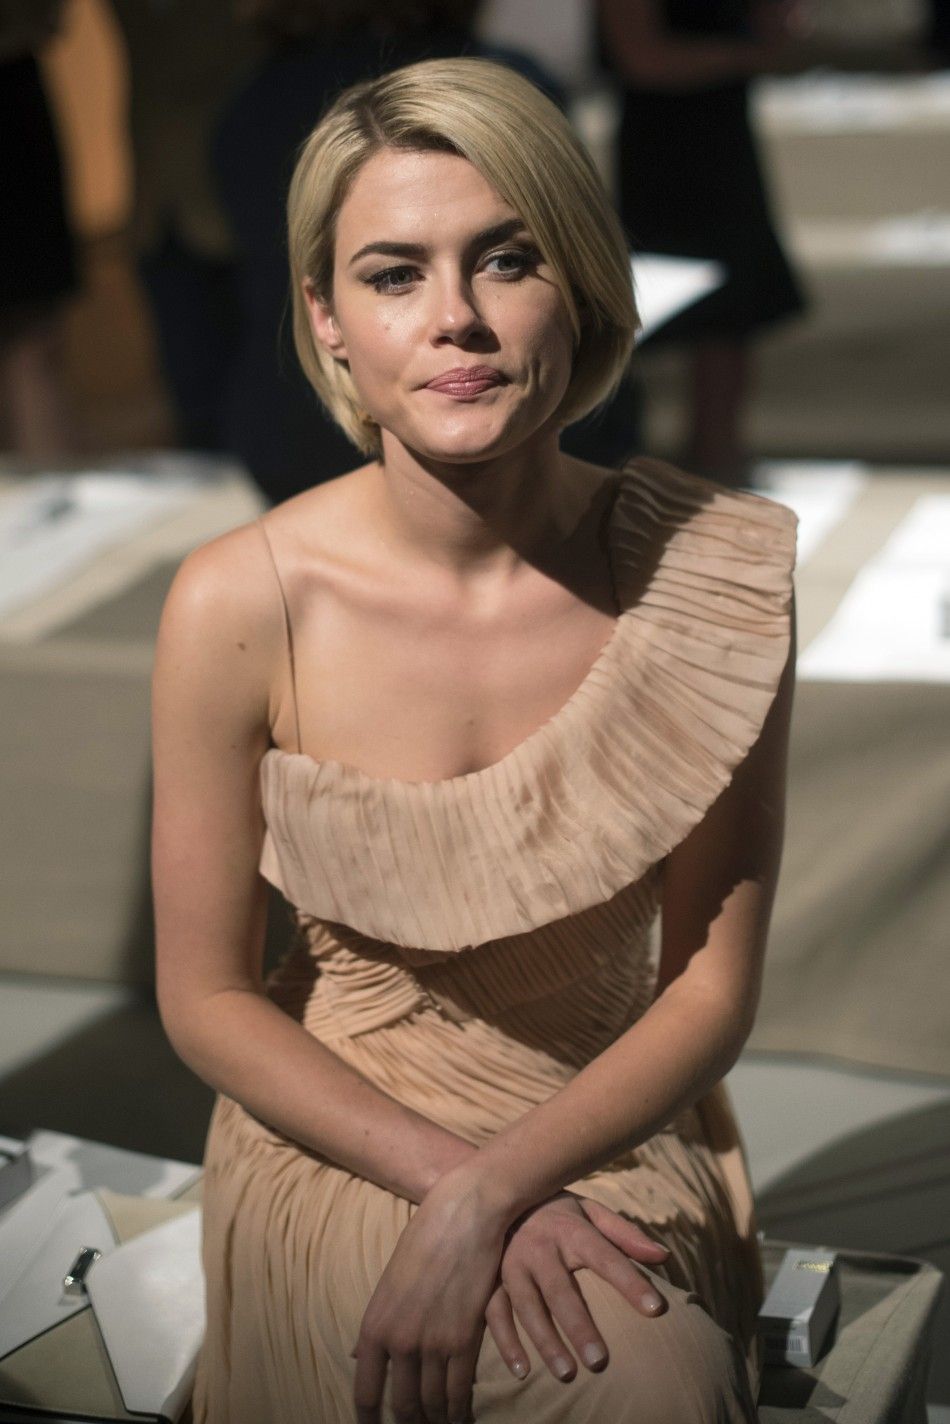 Australian actress Rachel Taylor poses for photographers before the presentation of the Donna Karan SpringSummer 2013 collection during New York Fashion Week September 10, 2012.